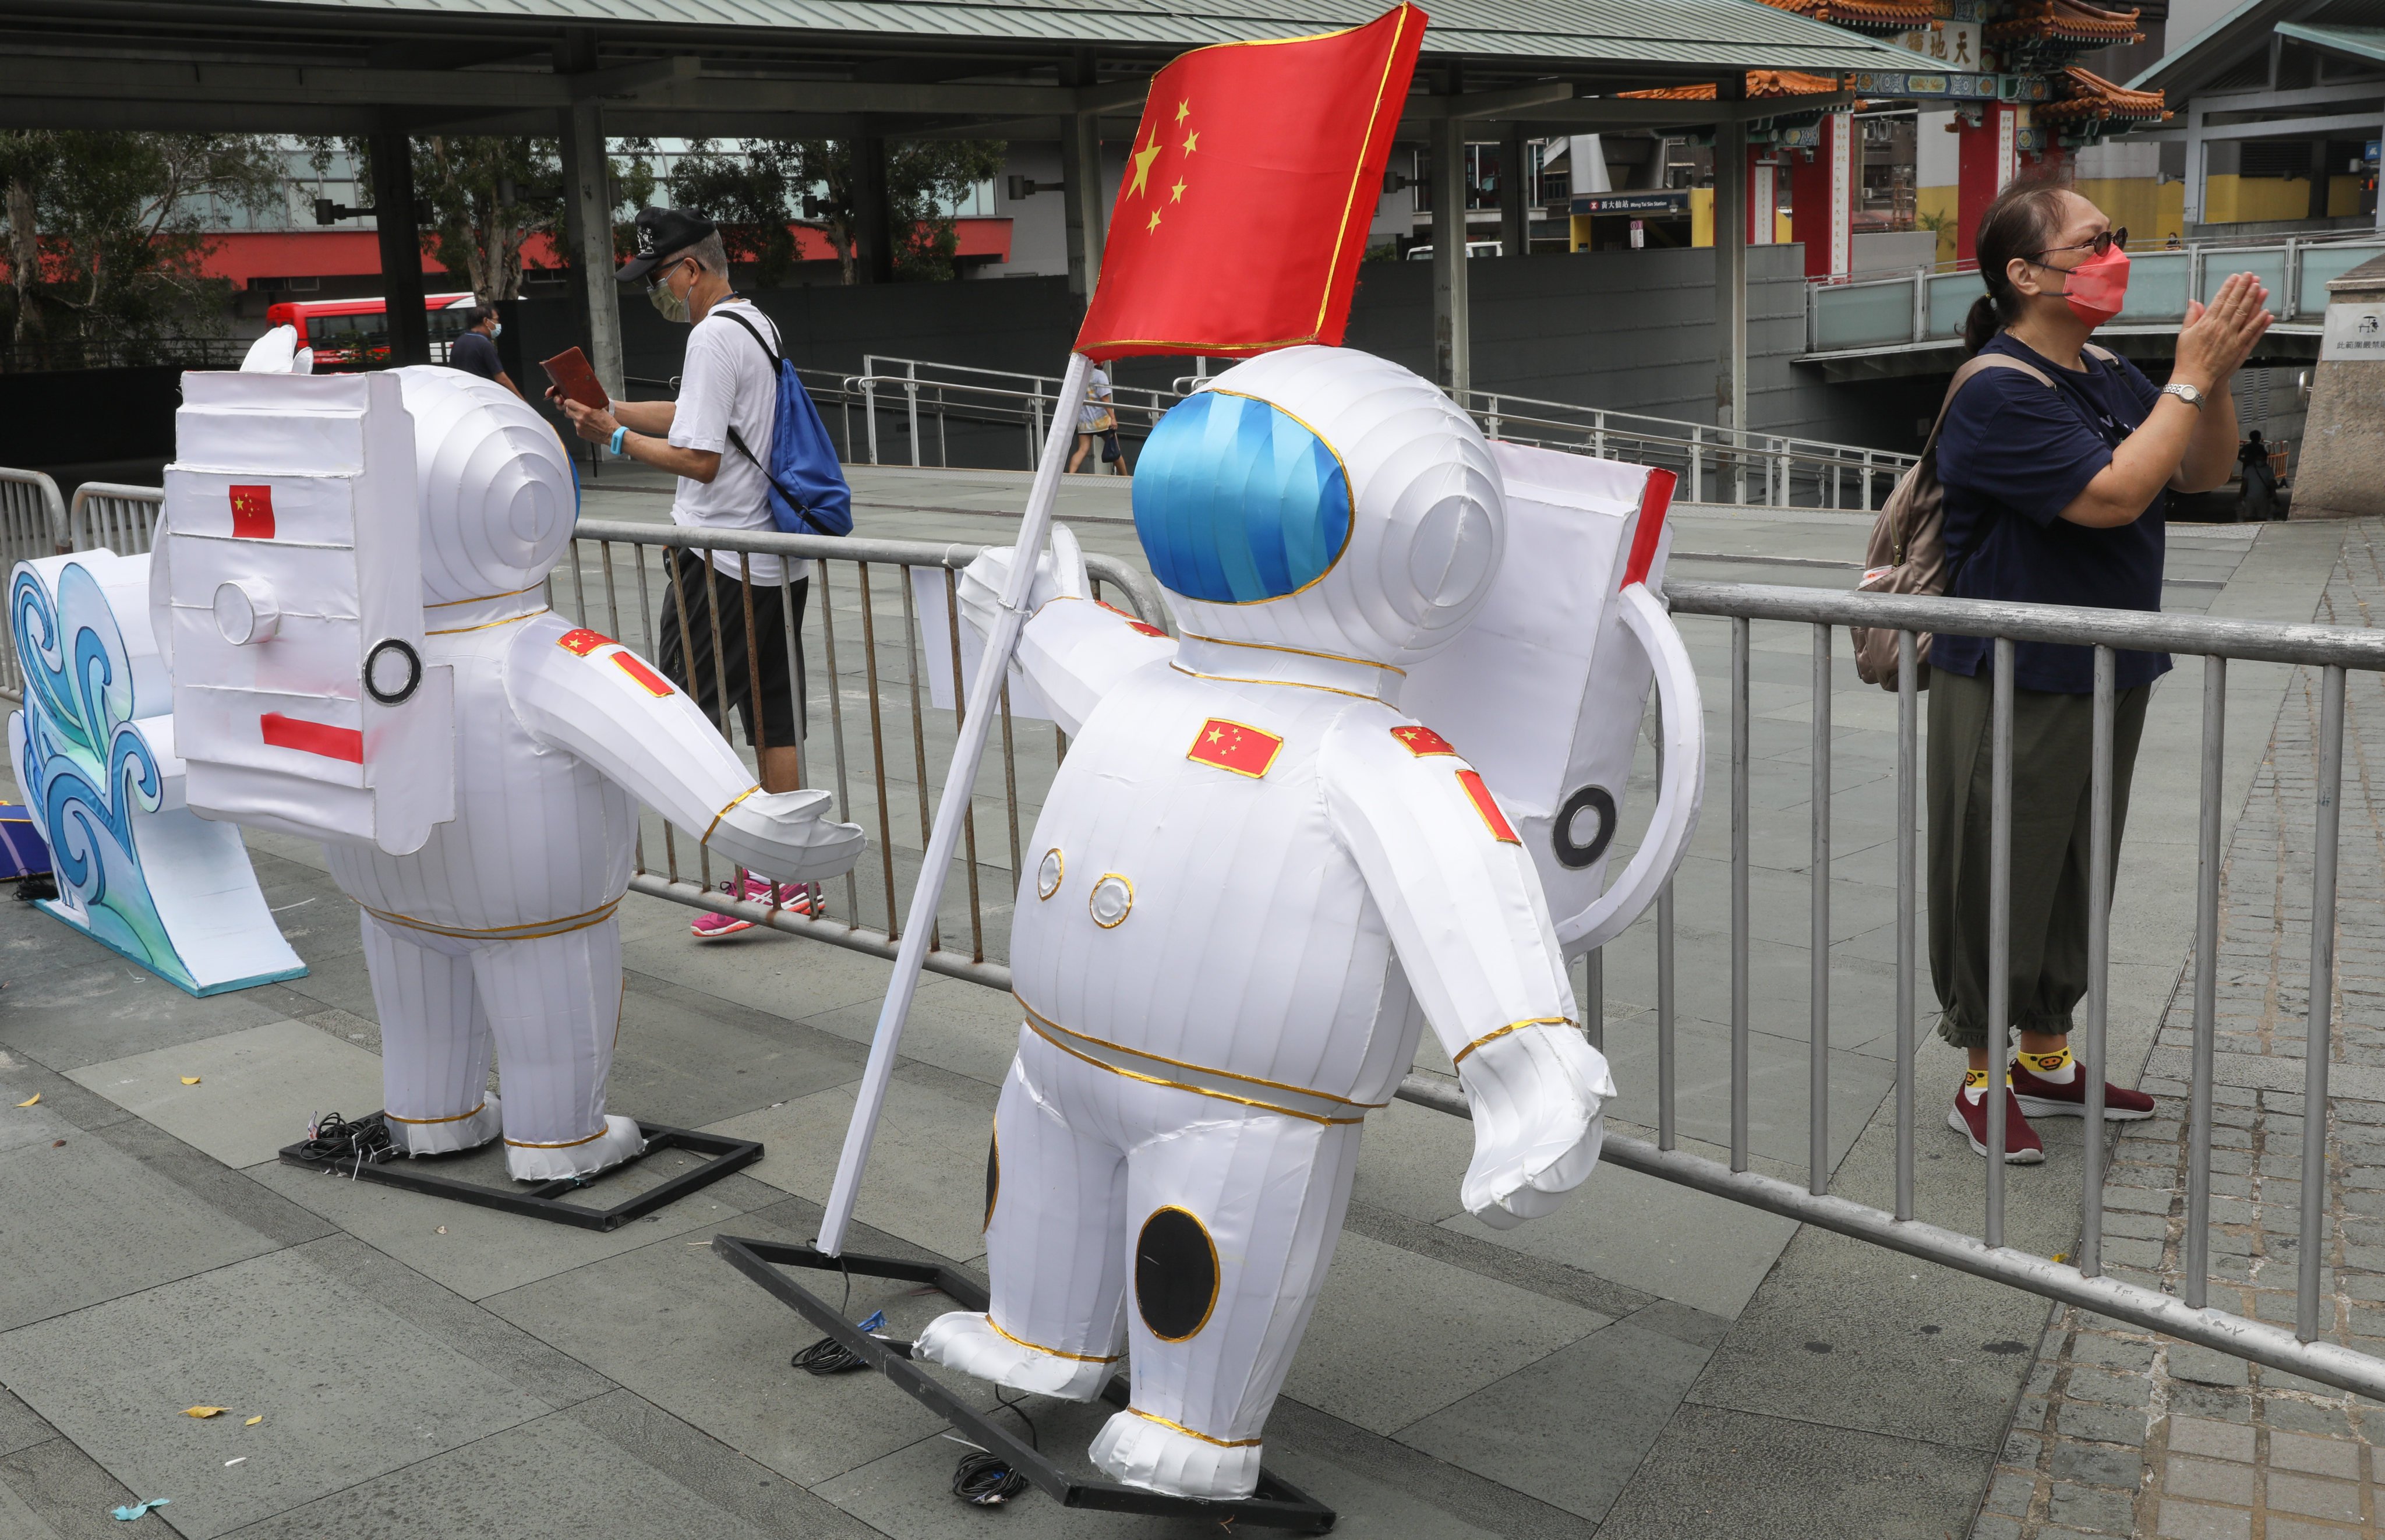 Chinese astronaut decorations are seen outside Wong Tai Sin Temple in Hong Kong on September 6, 2022. Photo: Yik Yeung-man